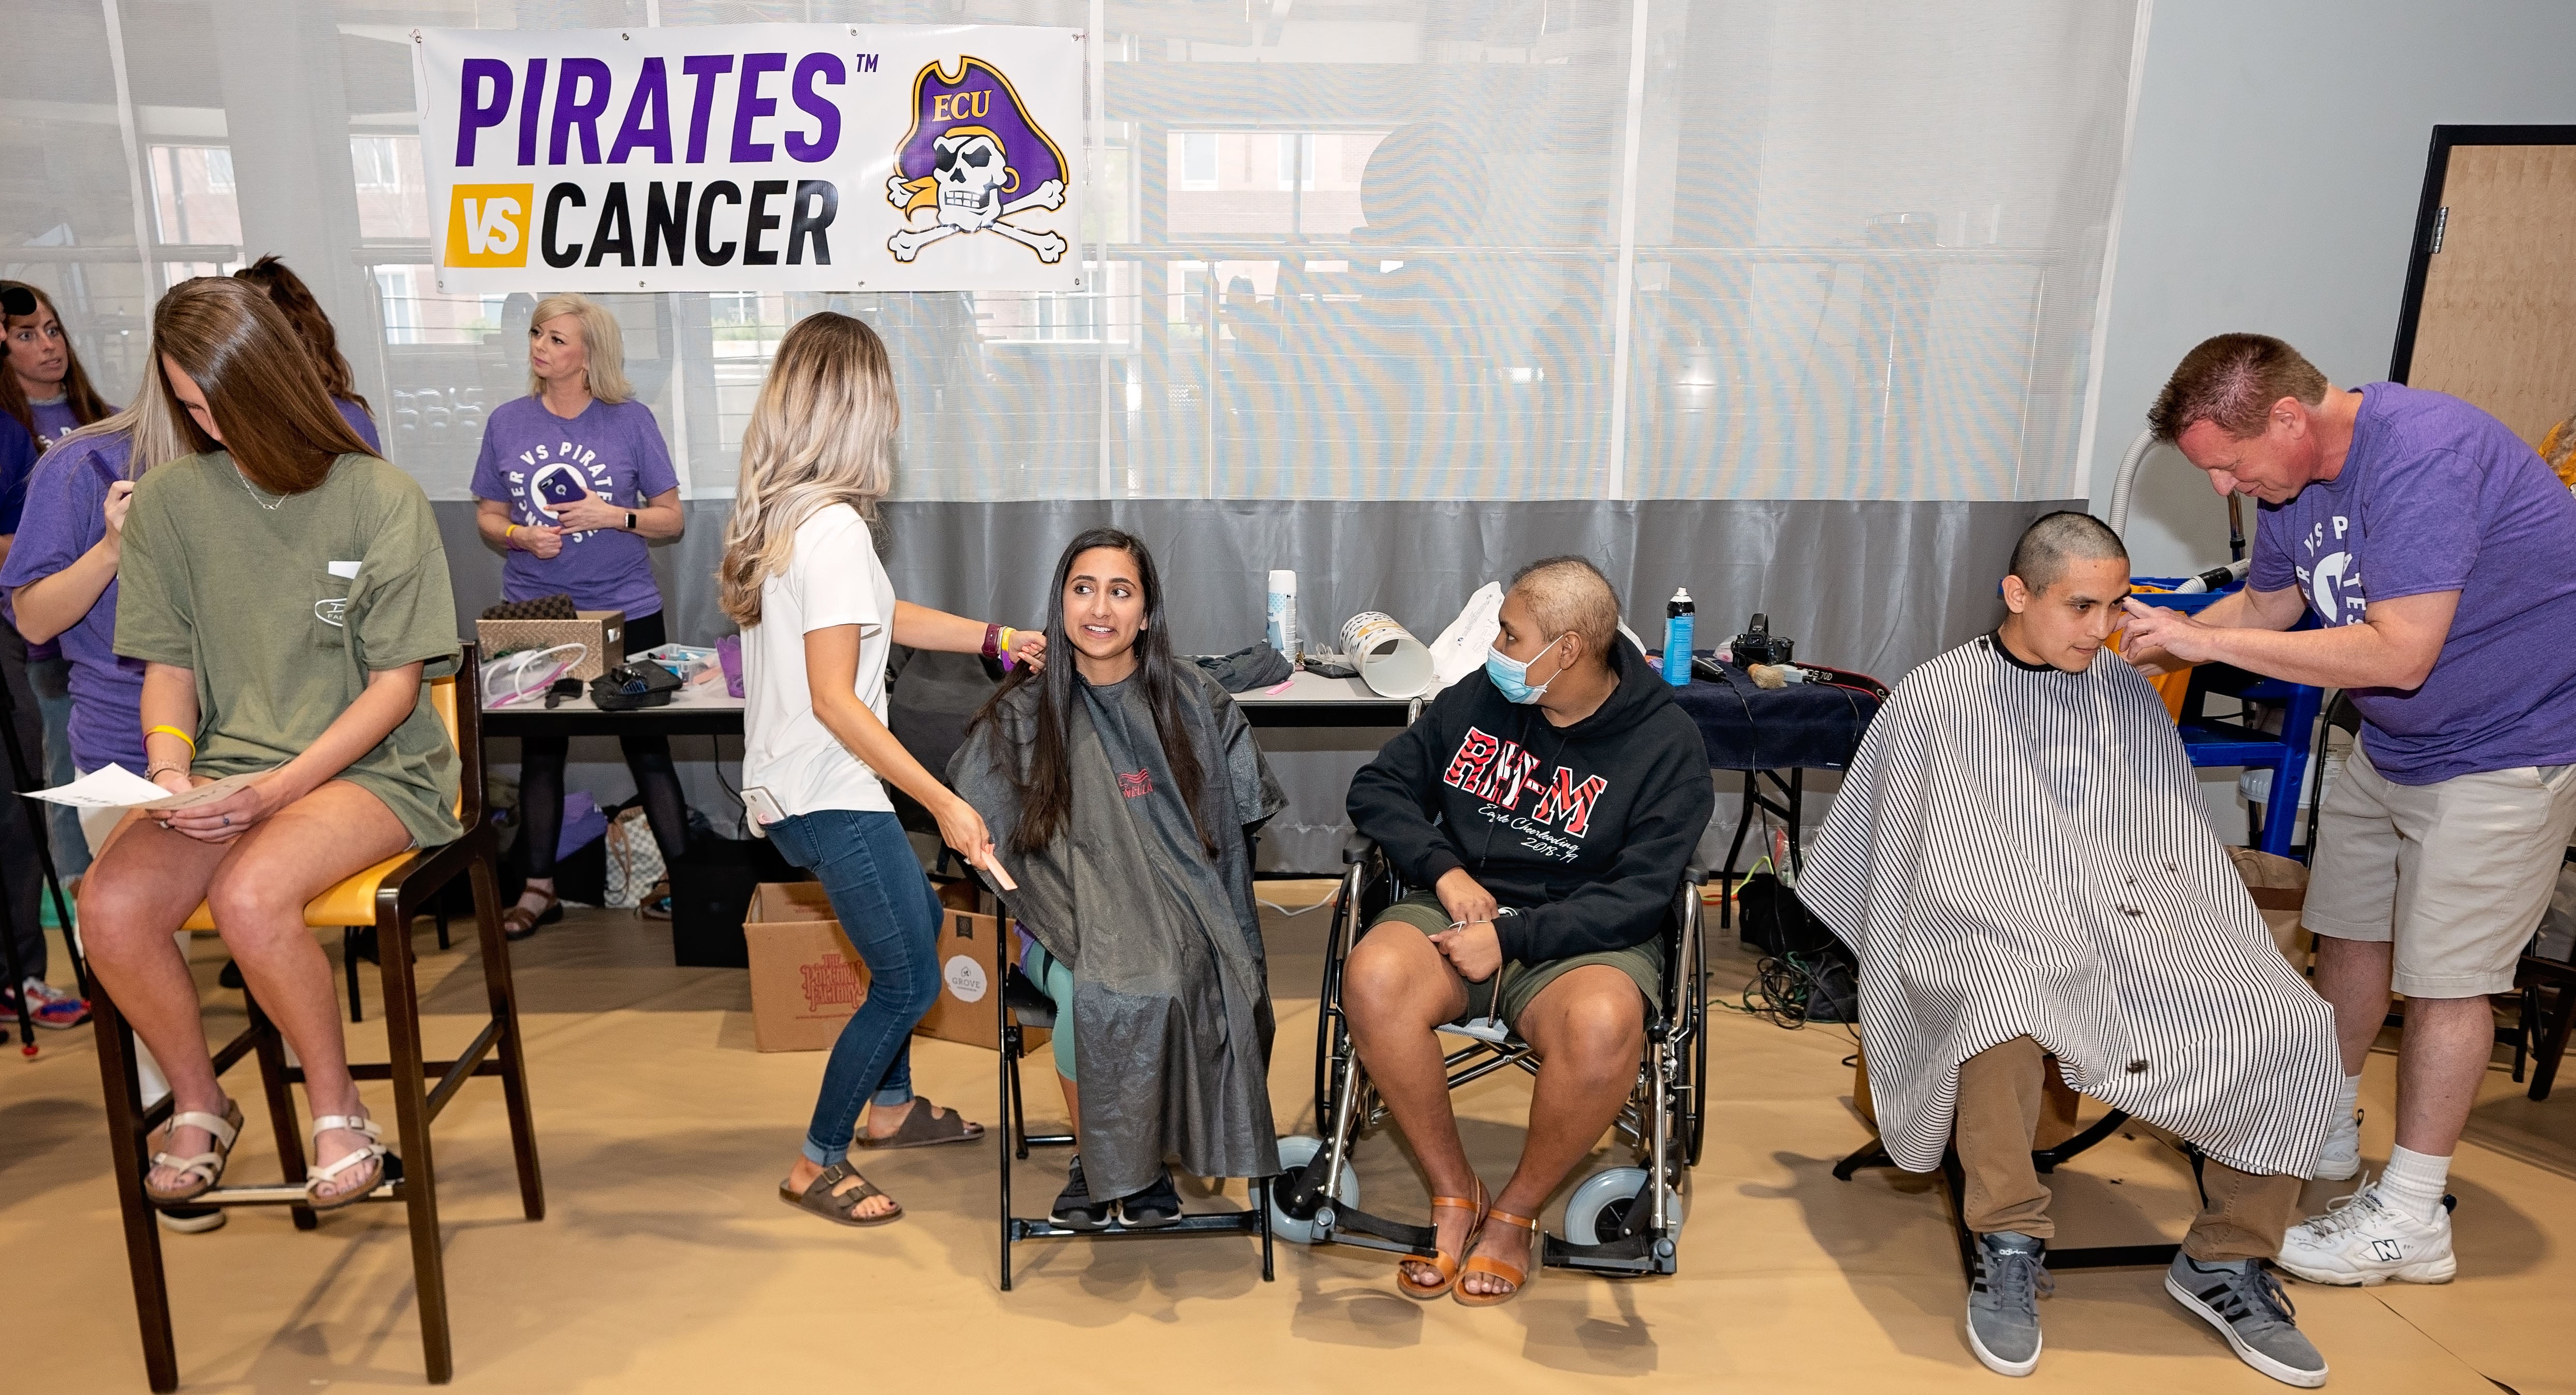 Pirates Vs. Cancer raised more than $52,000.